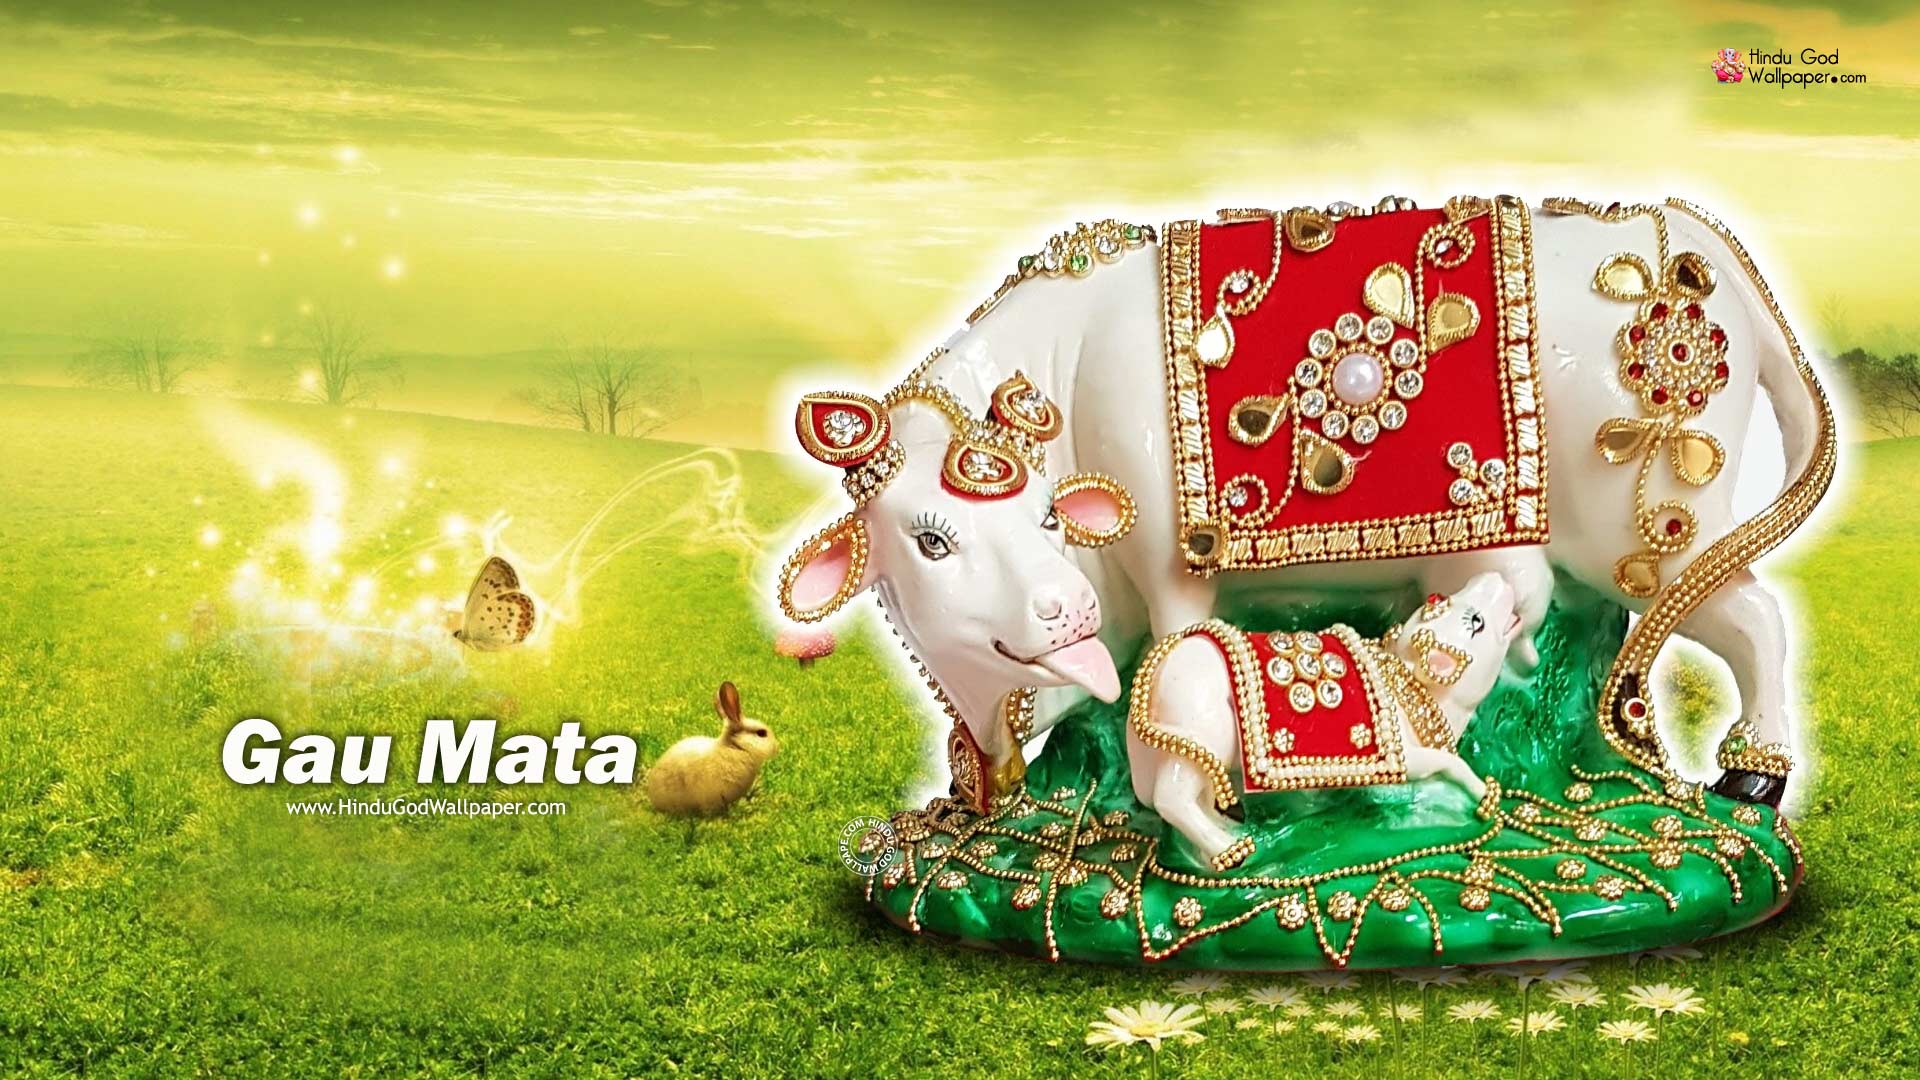 Gau Mata Wallpapers HD Images, Photos Gallery Download 1080p